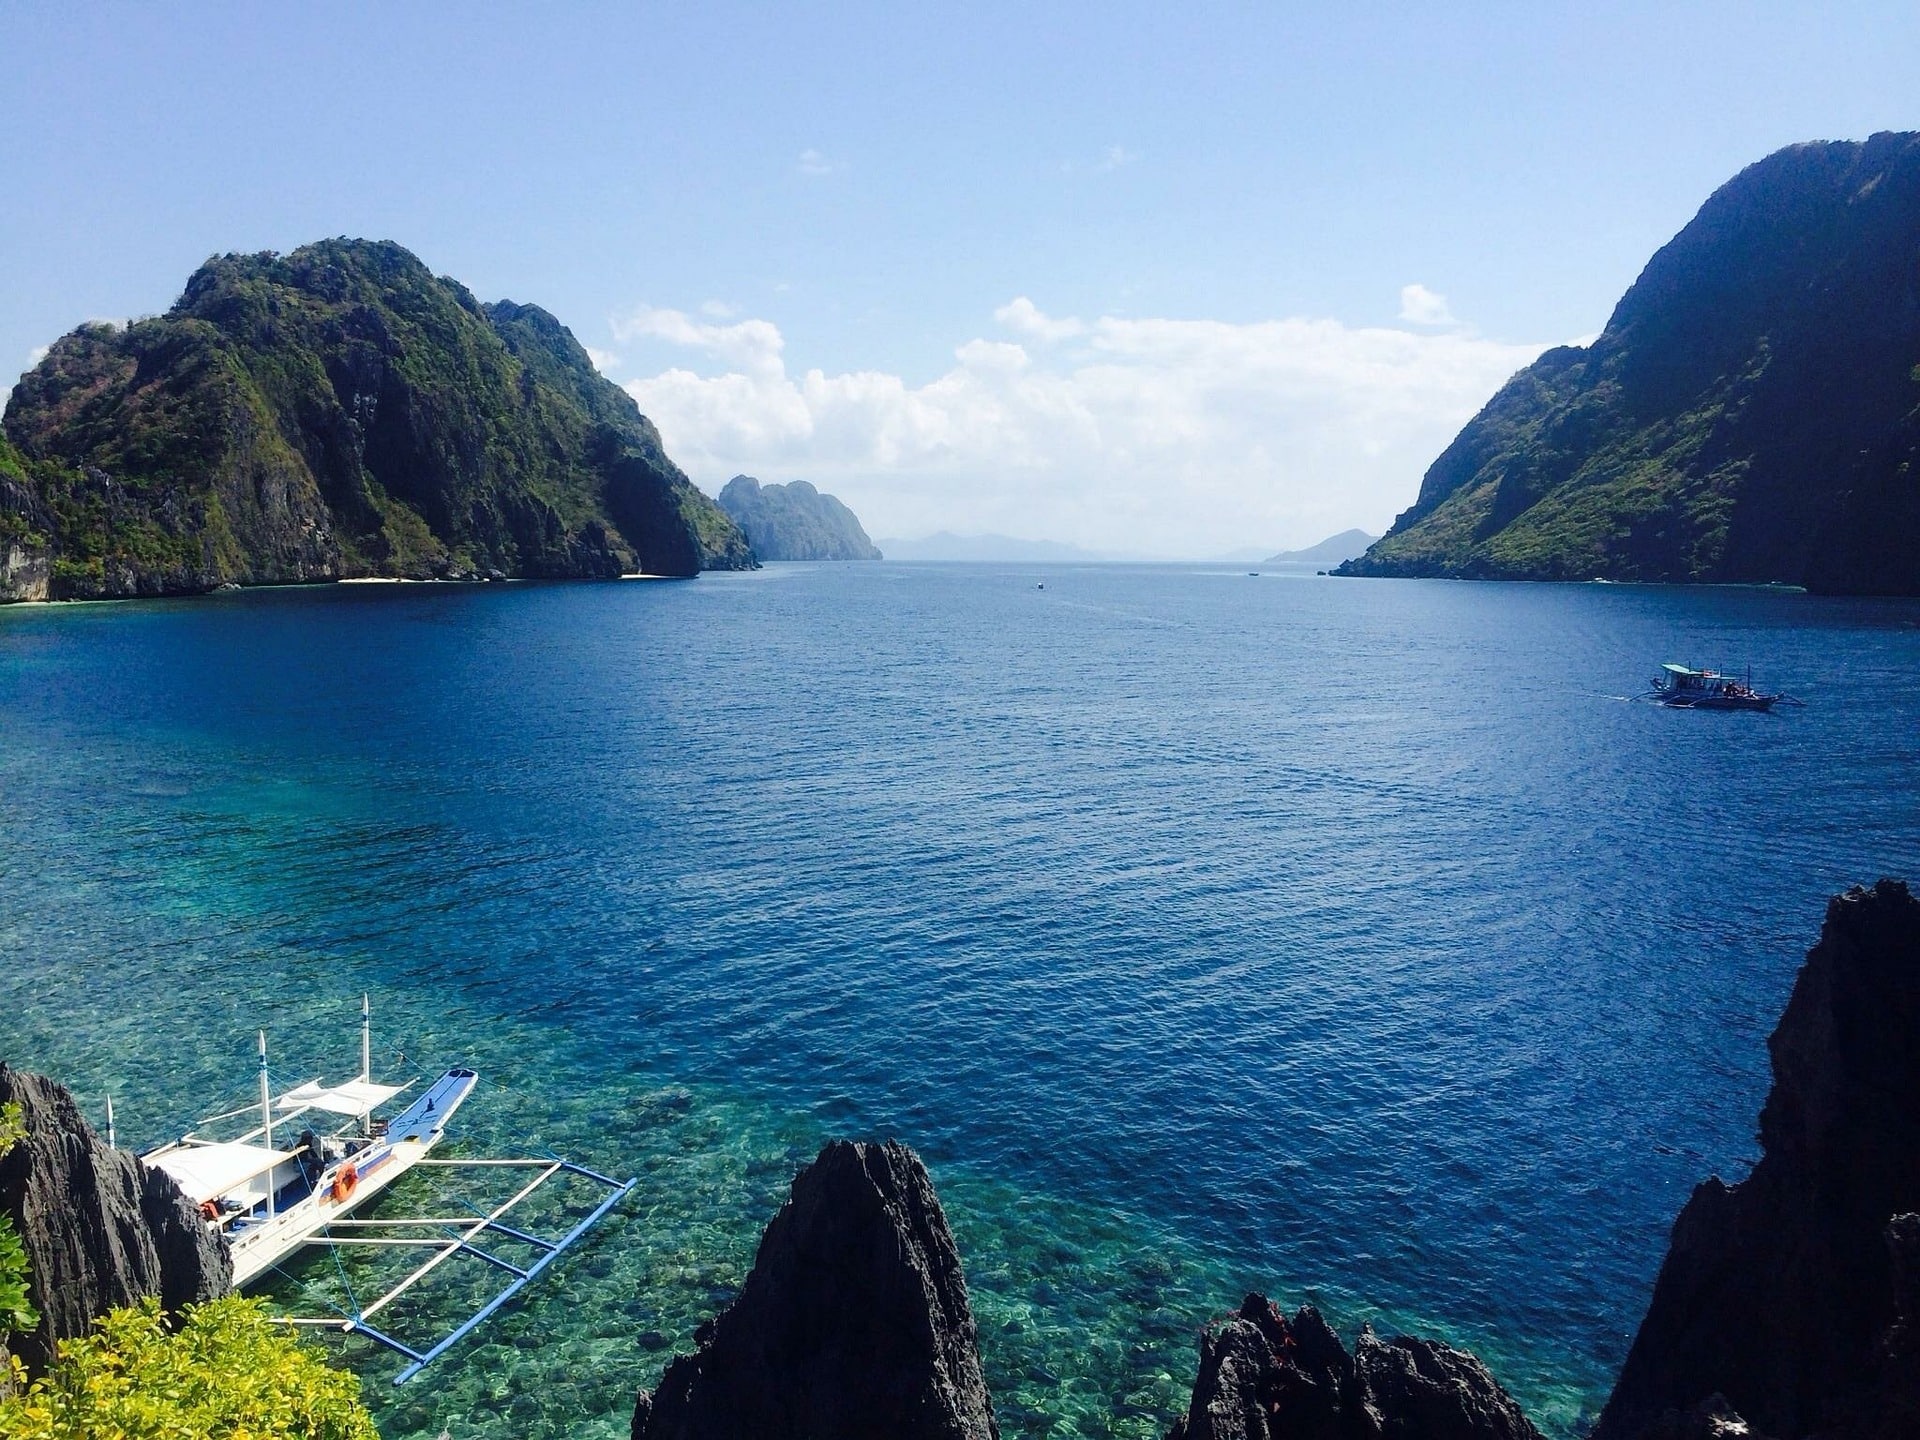 The Palawan, Philippines